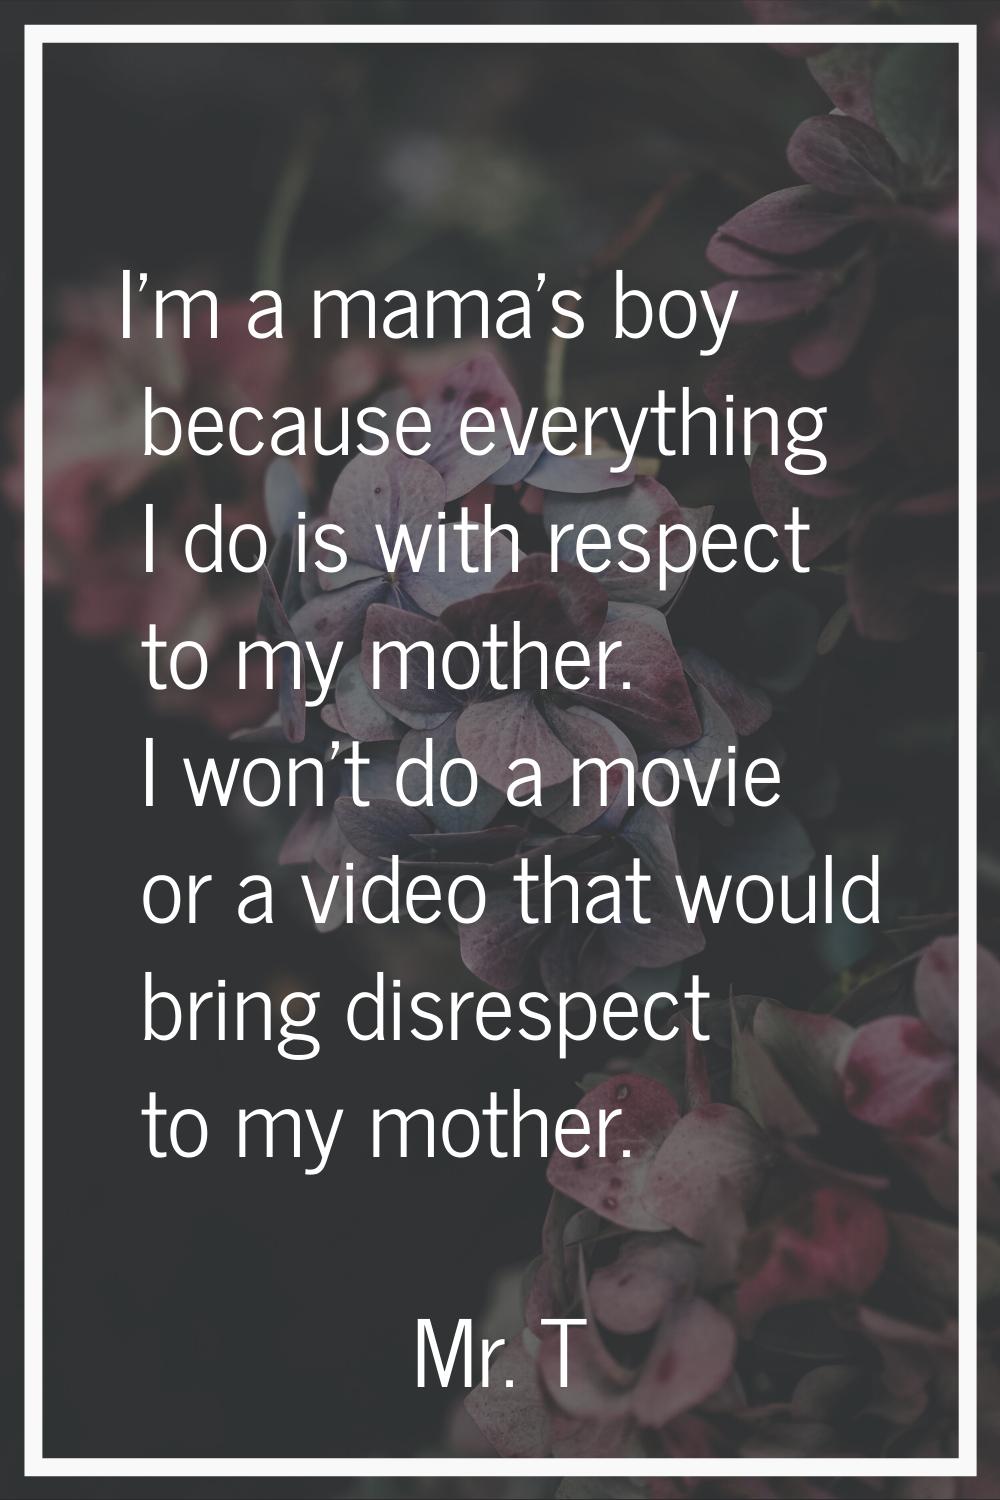 I'm a mama's boy because everything I do is with respect to my mother. I won't do a movie or a vide